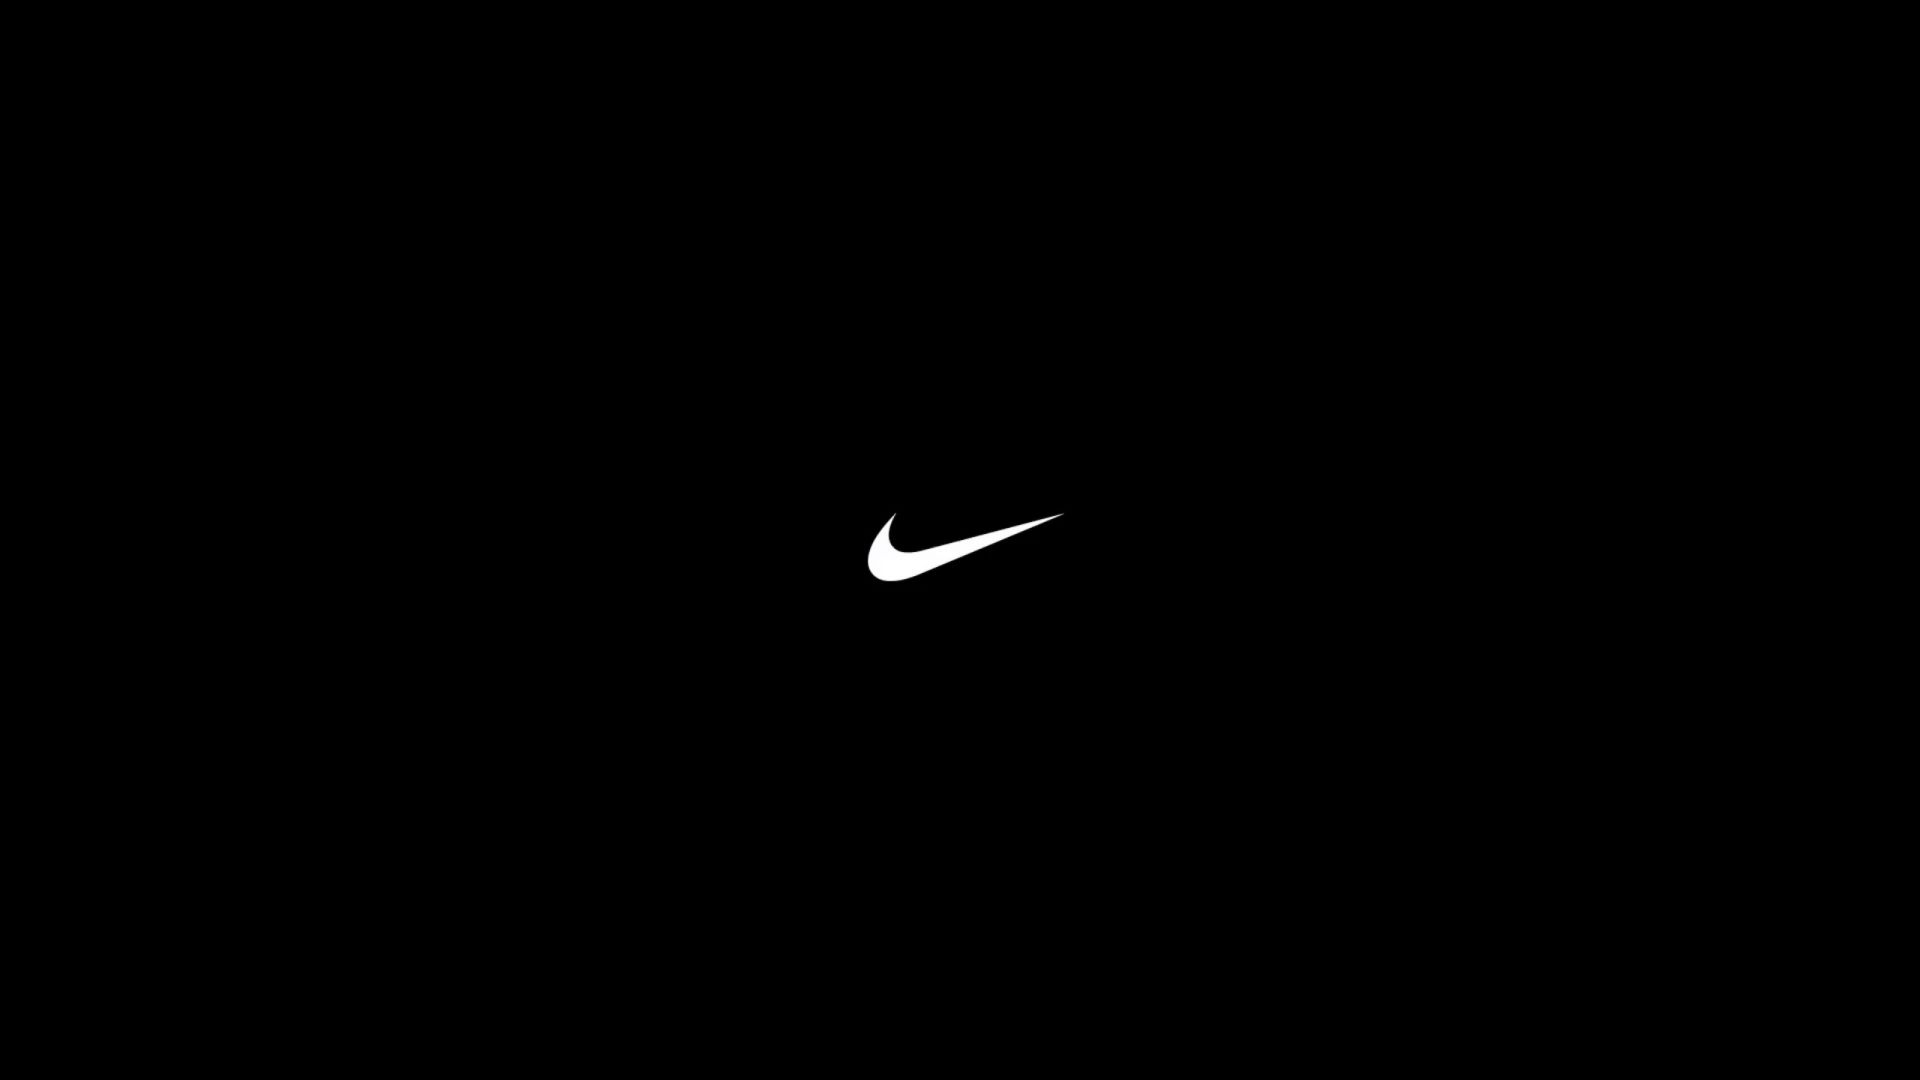 Nike Quotes Wallpapers